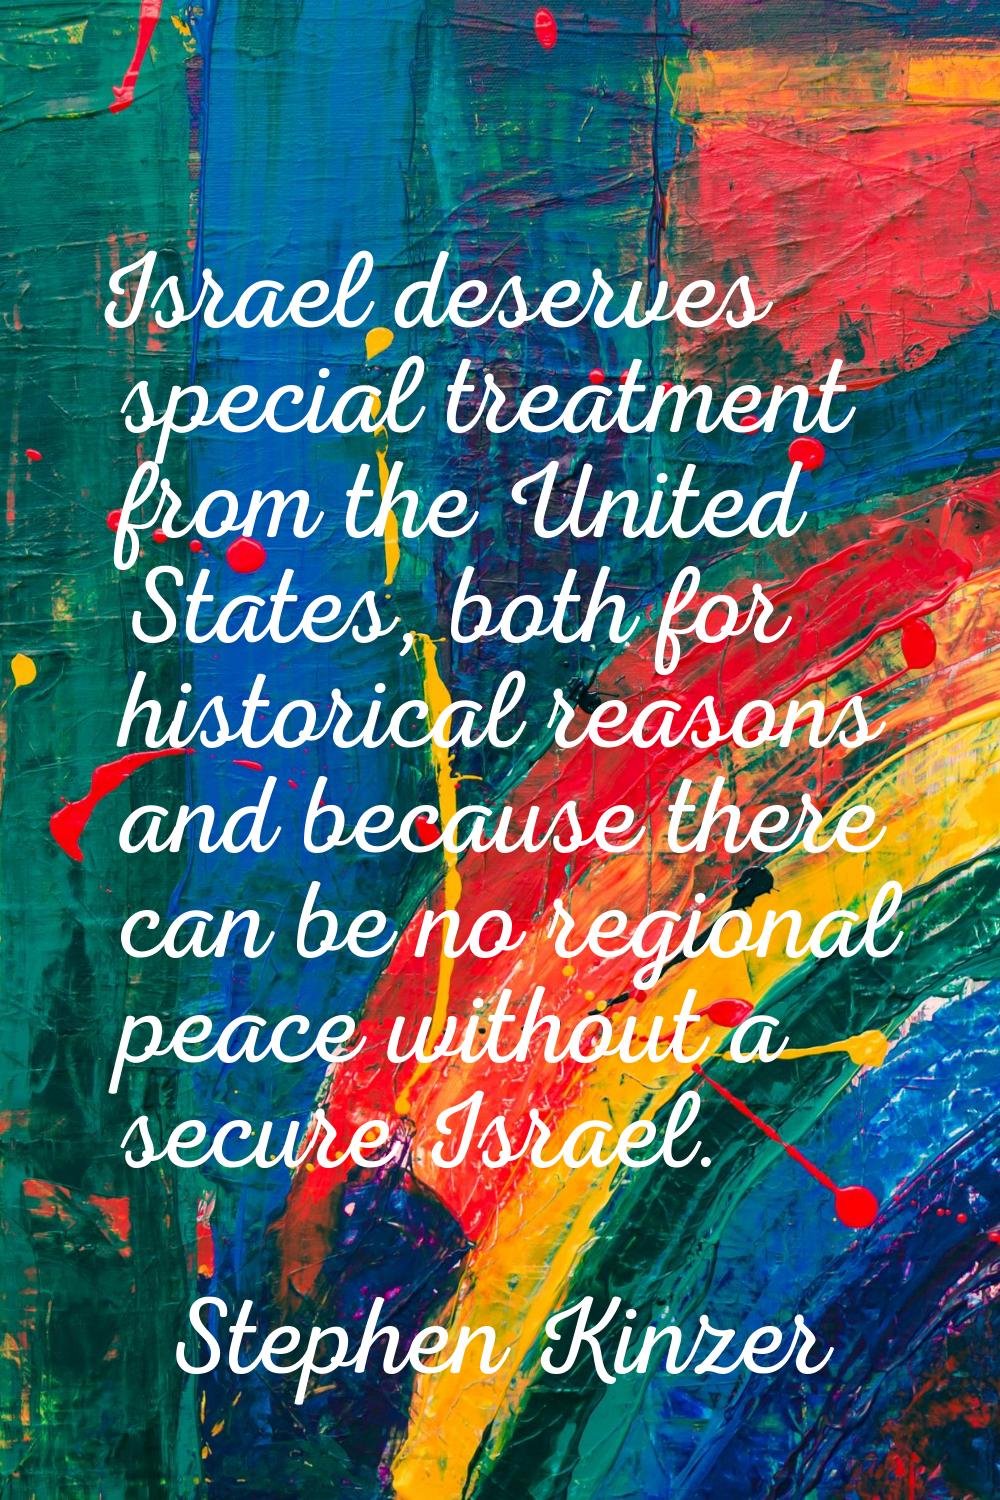 Israel deserves special treatment from the United States, both for historical reasons and because t